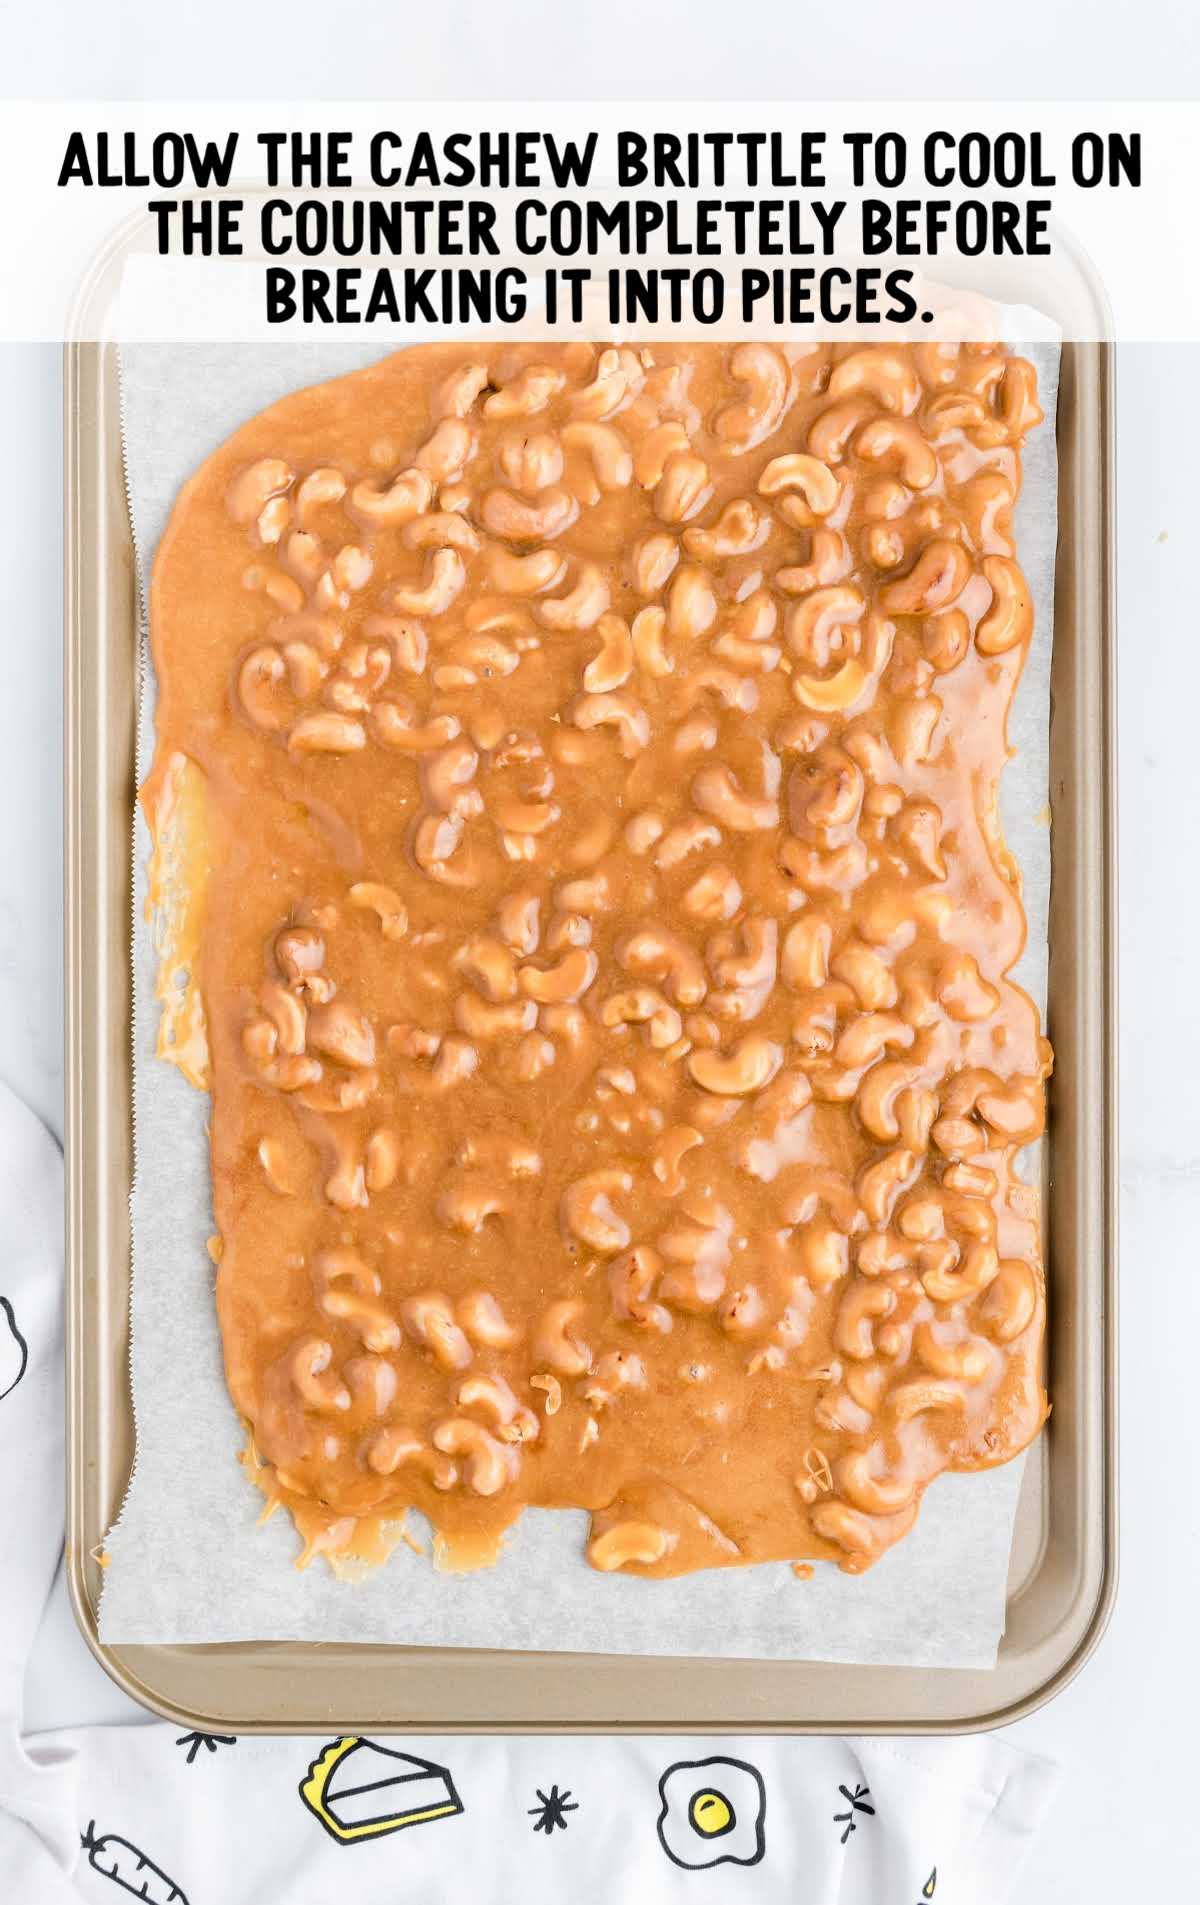 Cashew Brittle cooled on a baking tray